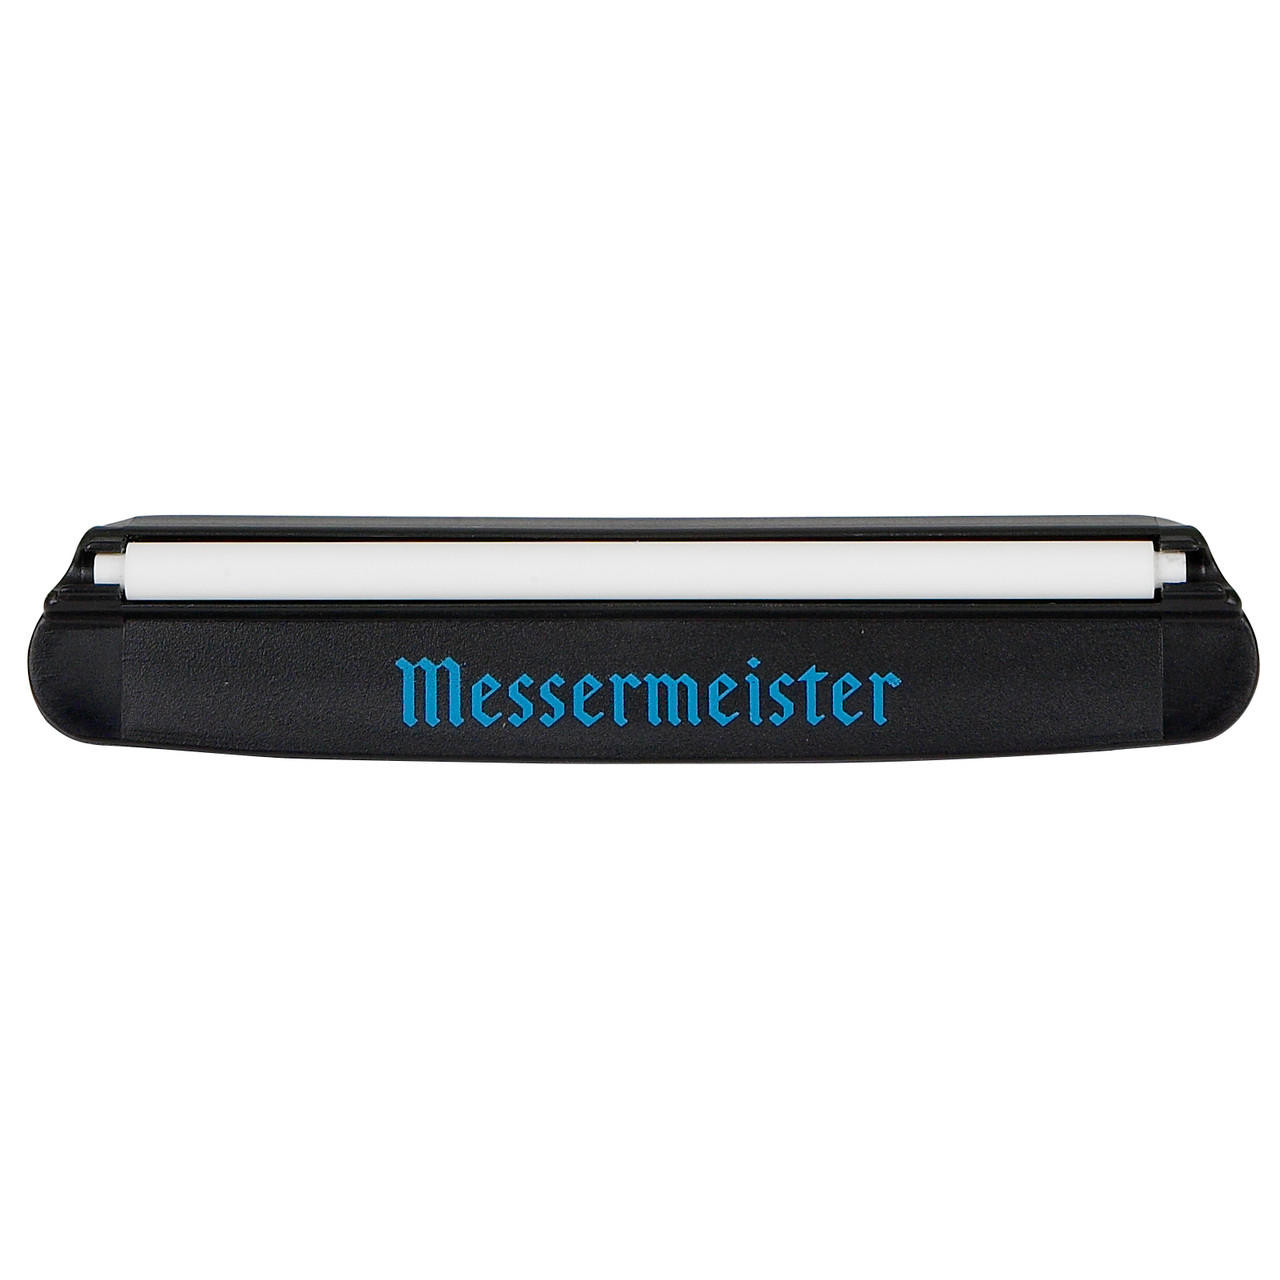 https://cdn11.bigcommerce.com/s-k3c8jdz2s4/images/stencil/1280x1280/products/226/5471/messermeister-sharpening-angle-guide__49195.1662537336.jpg?c=1